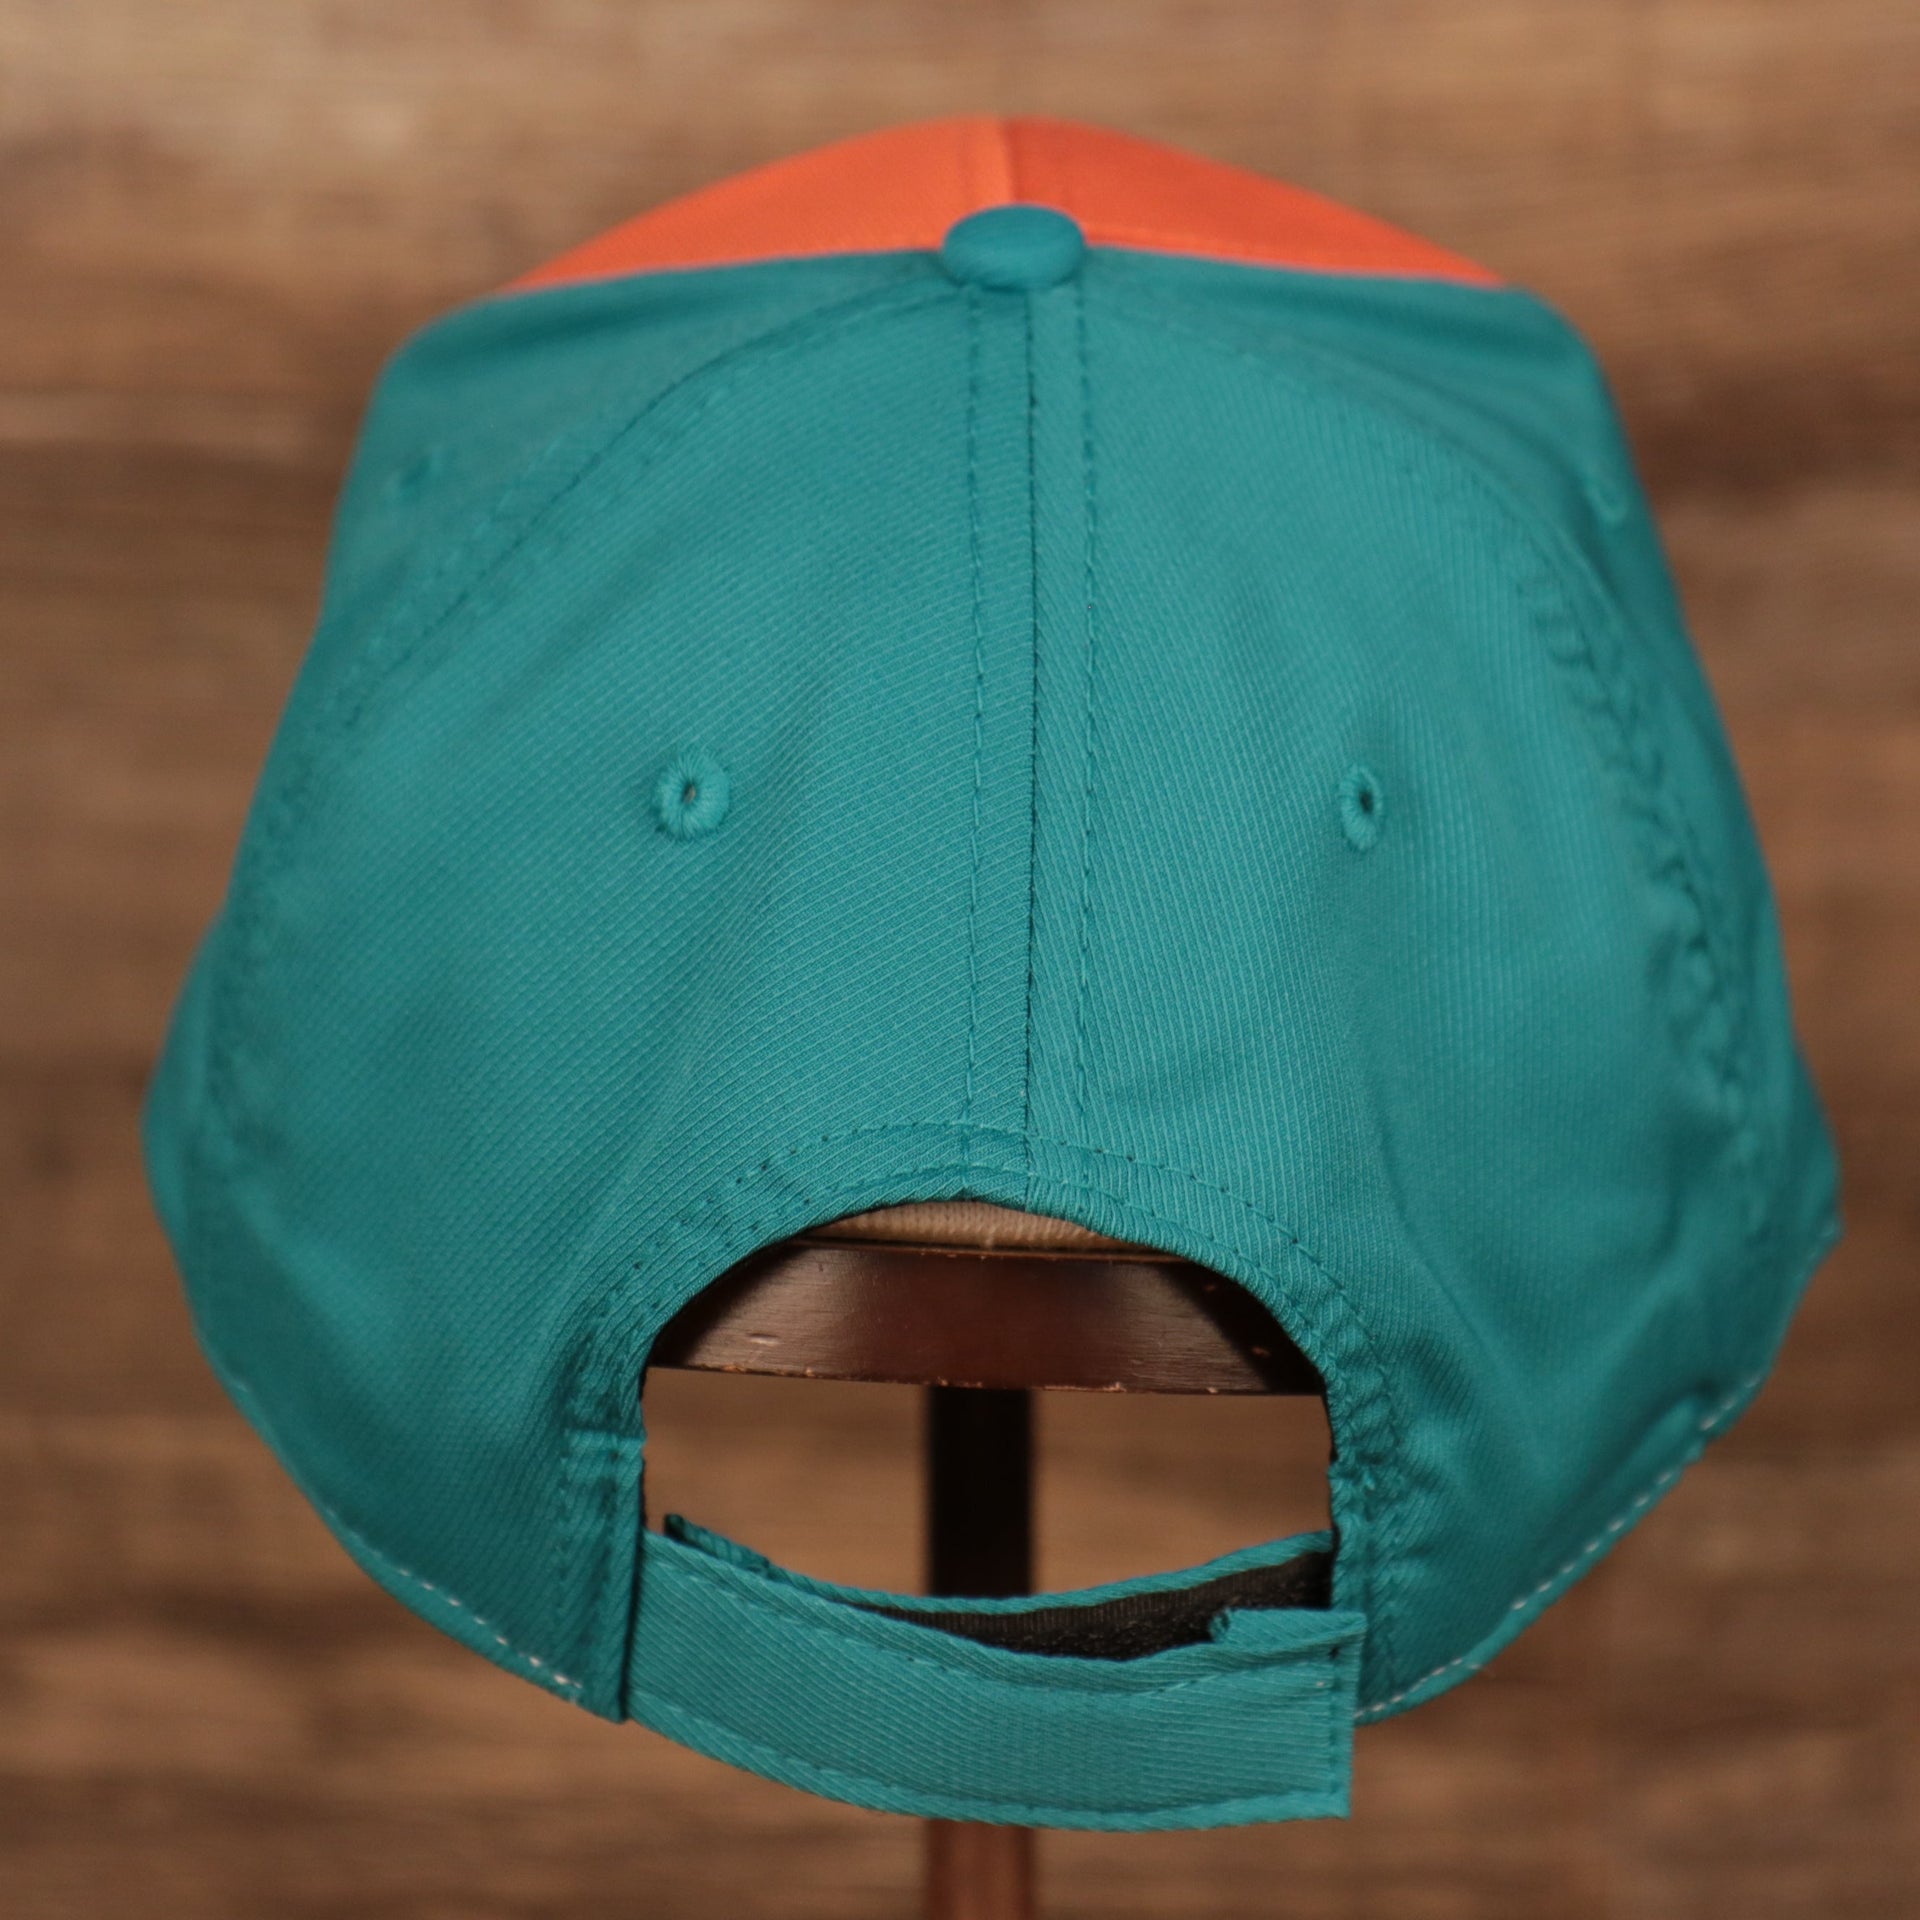 back side of the Miami Dolphins Orange and Teal Adjustable Dad Hat